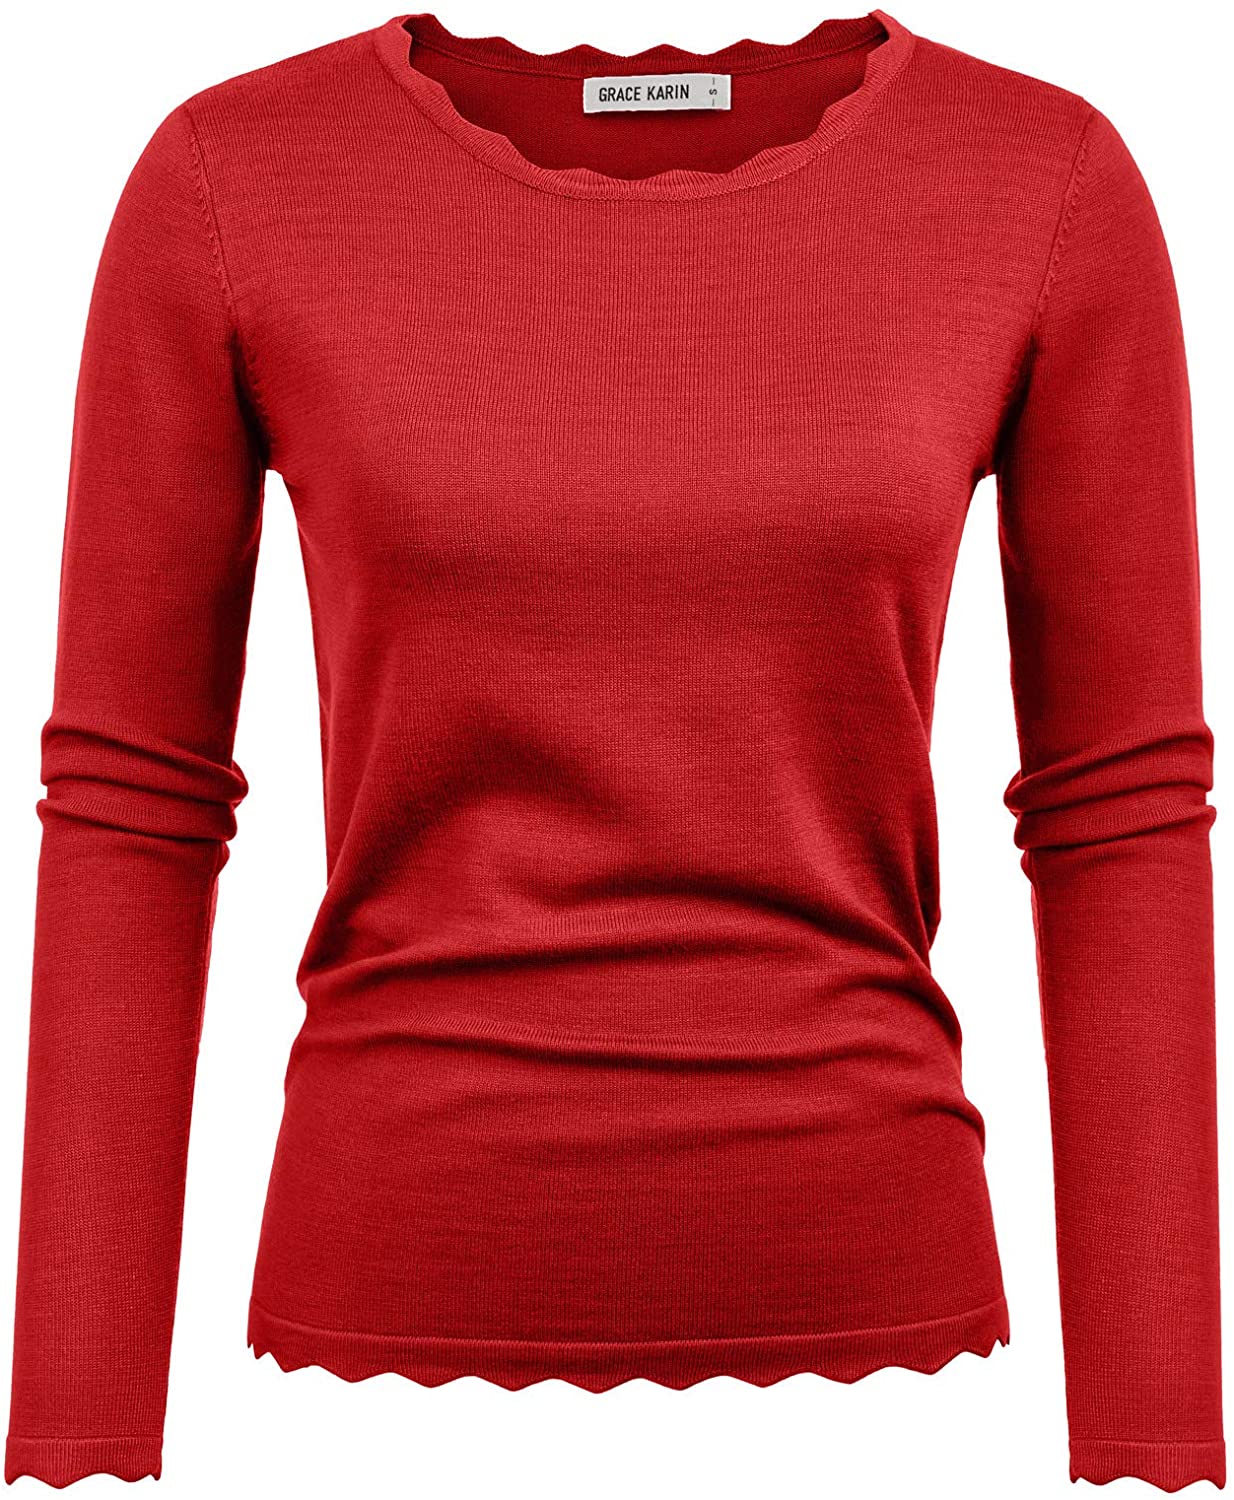 GRACE KARIN Women's High Stretchy Long Sleeve Pullover Sweater Blouse Top